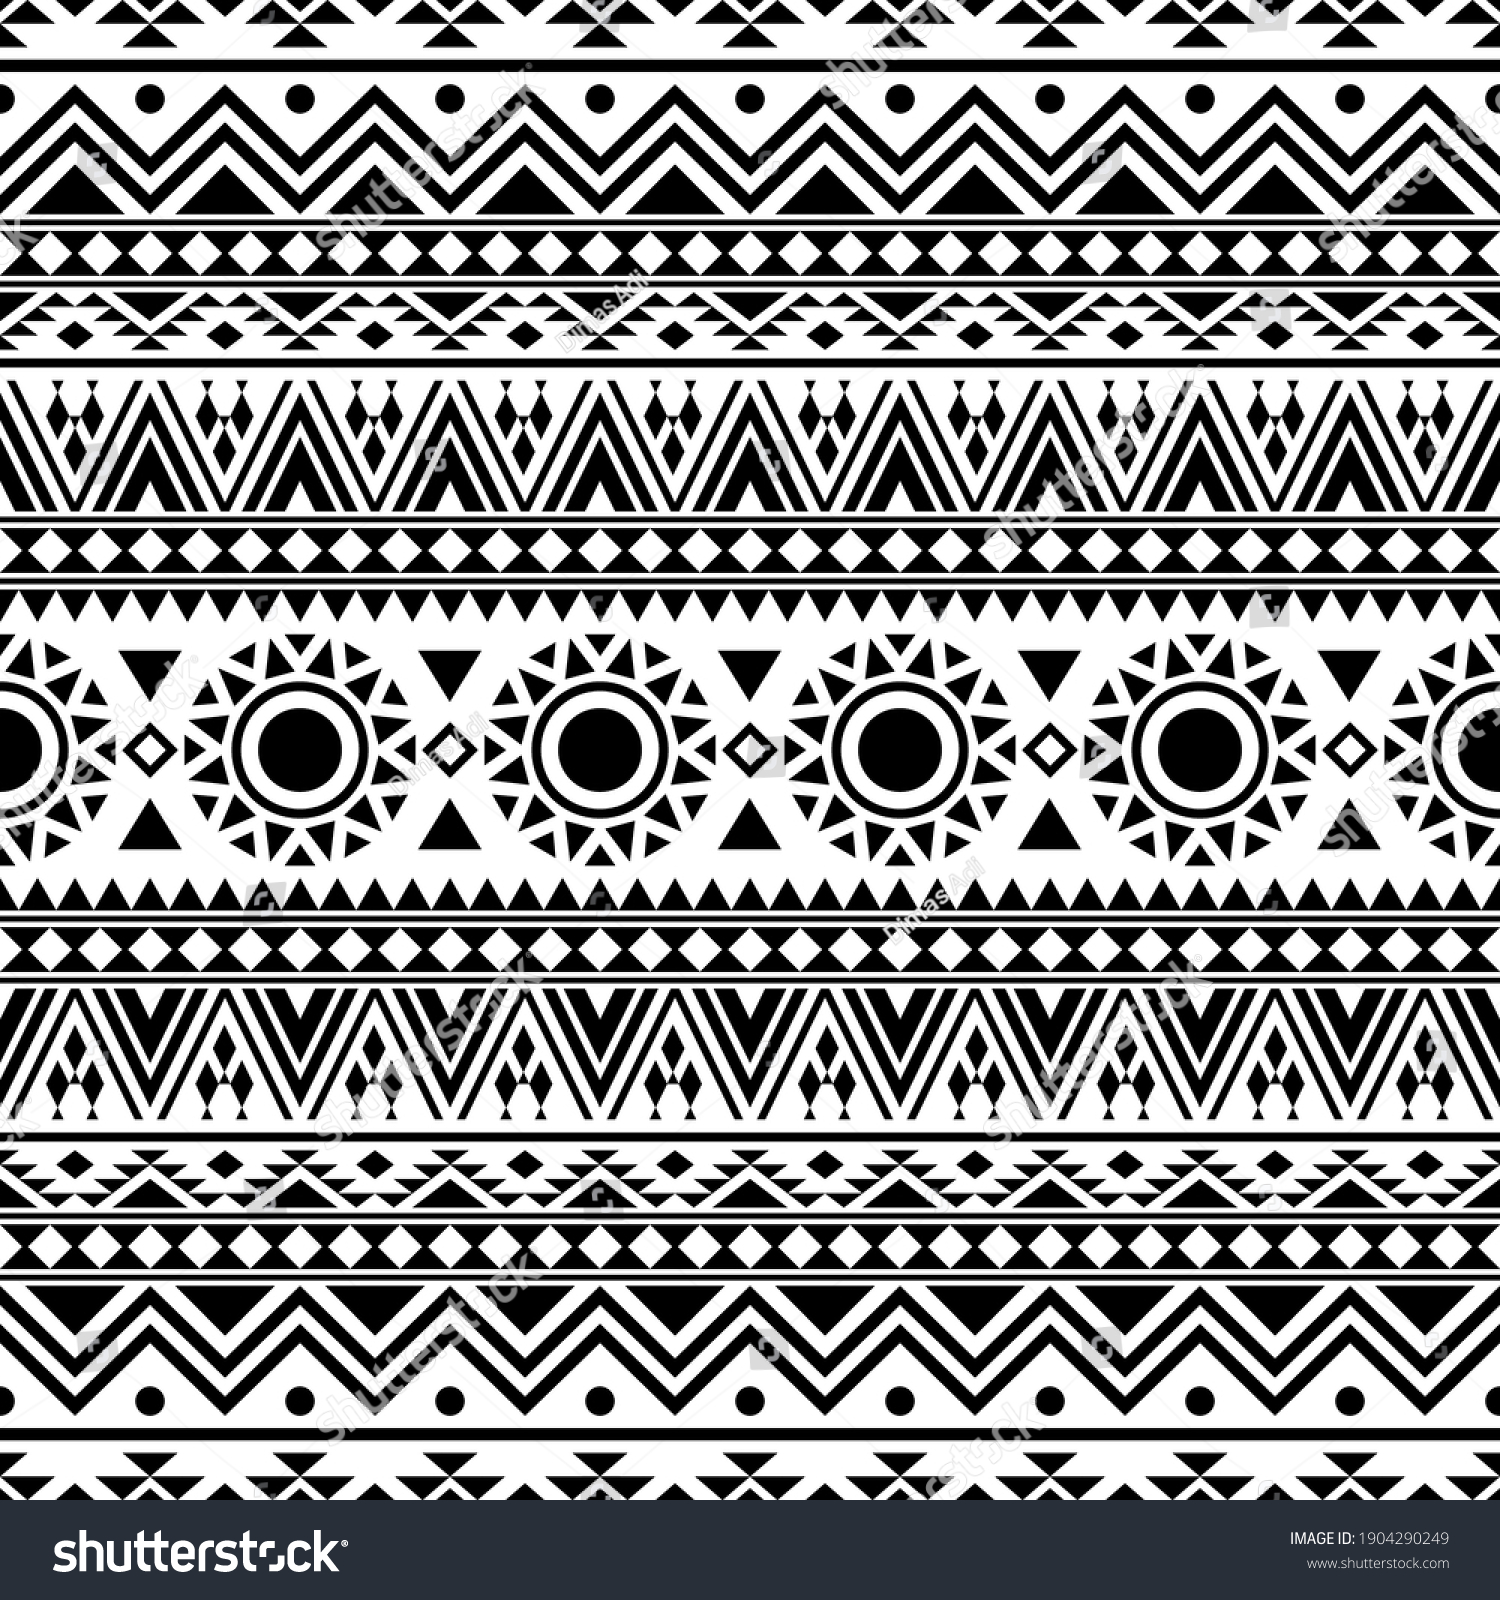 Seamless Ethnic Pattern Texture Background Design Stock Vector (Royalty ...